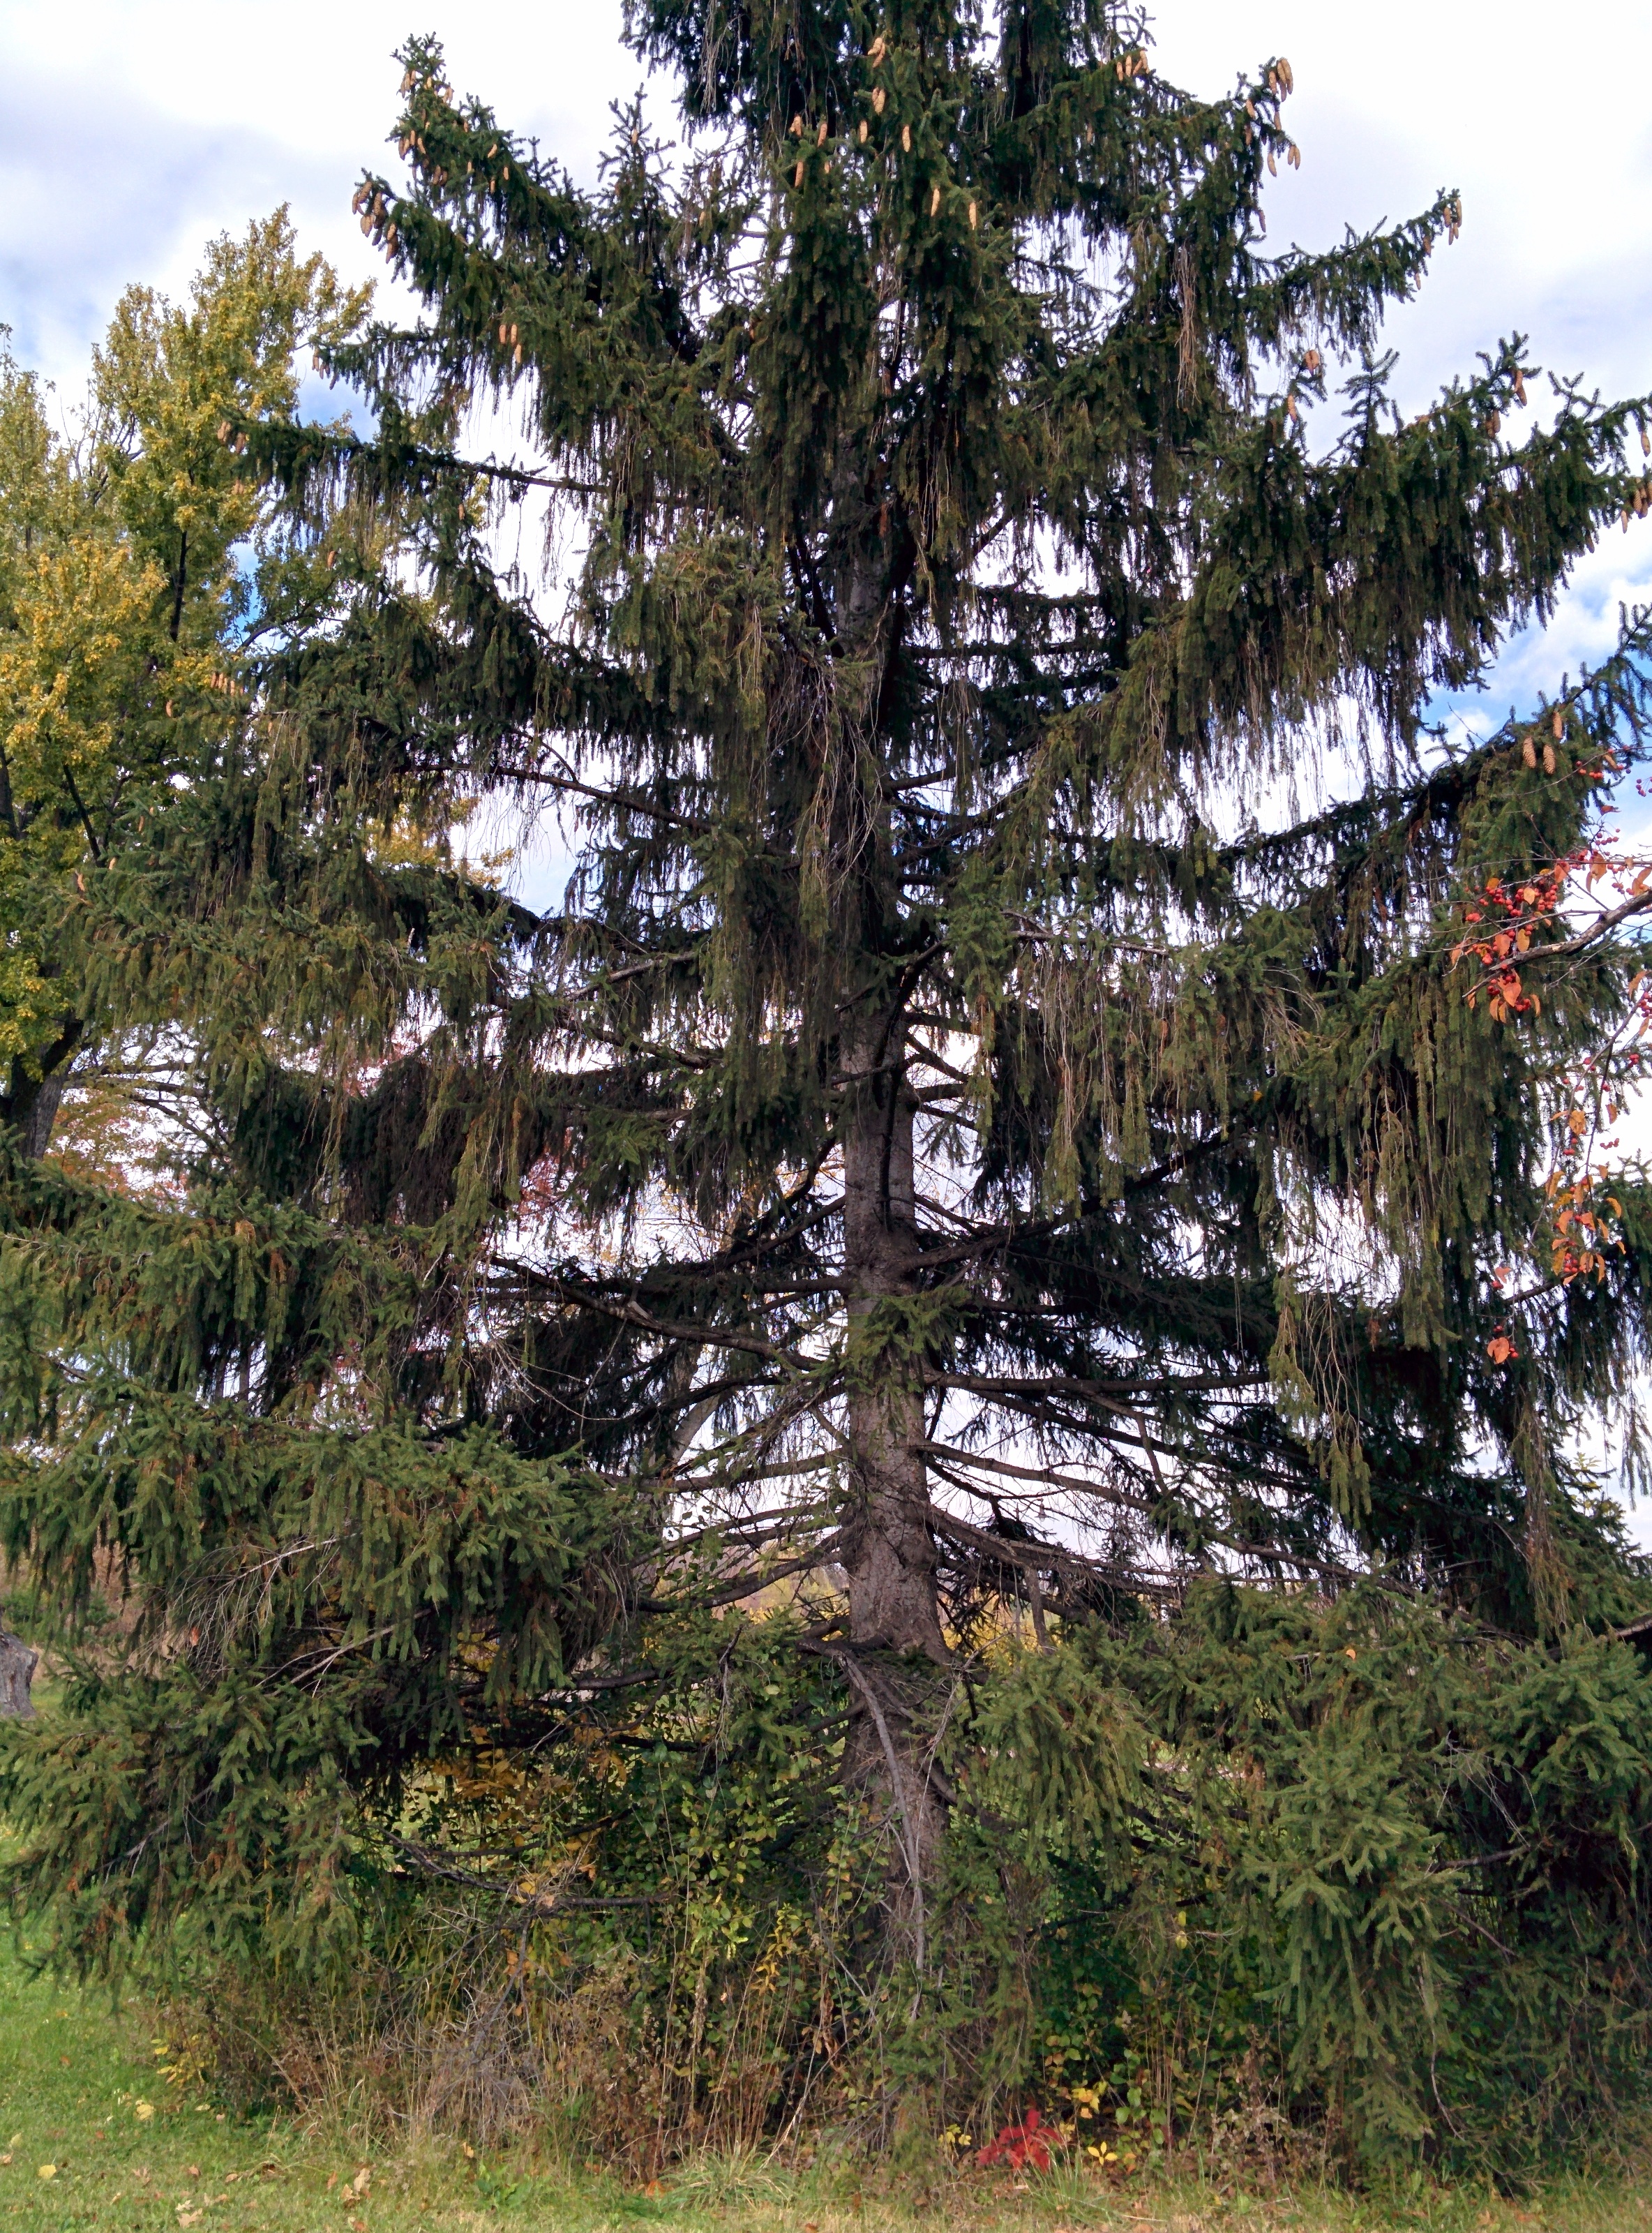 Norway spruce form